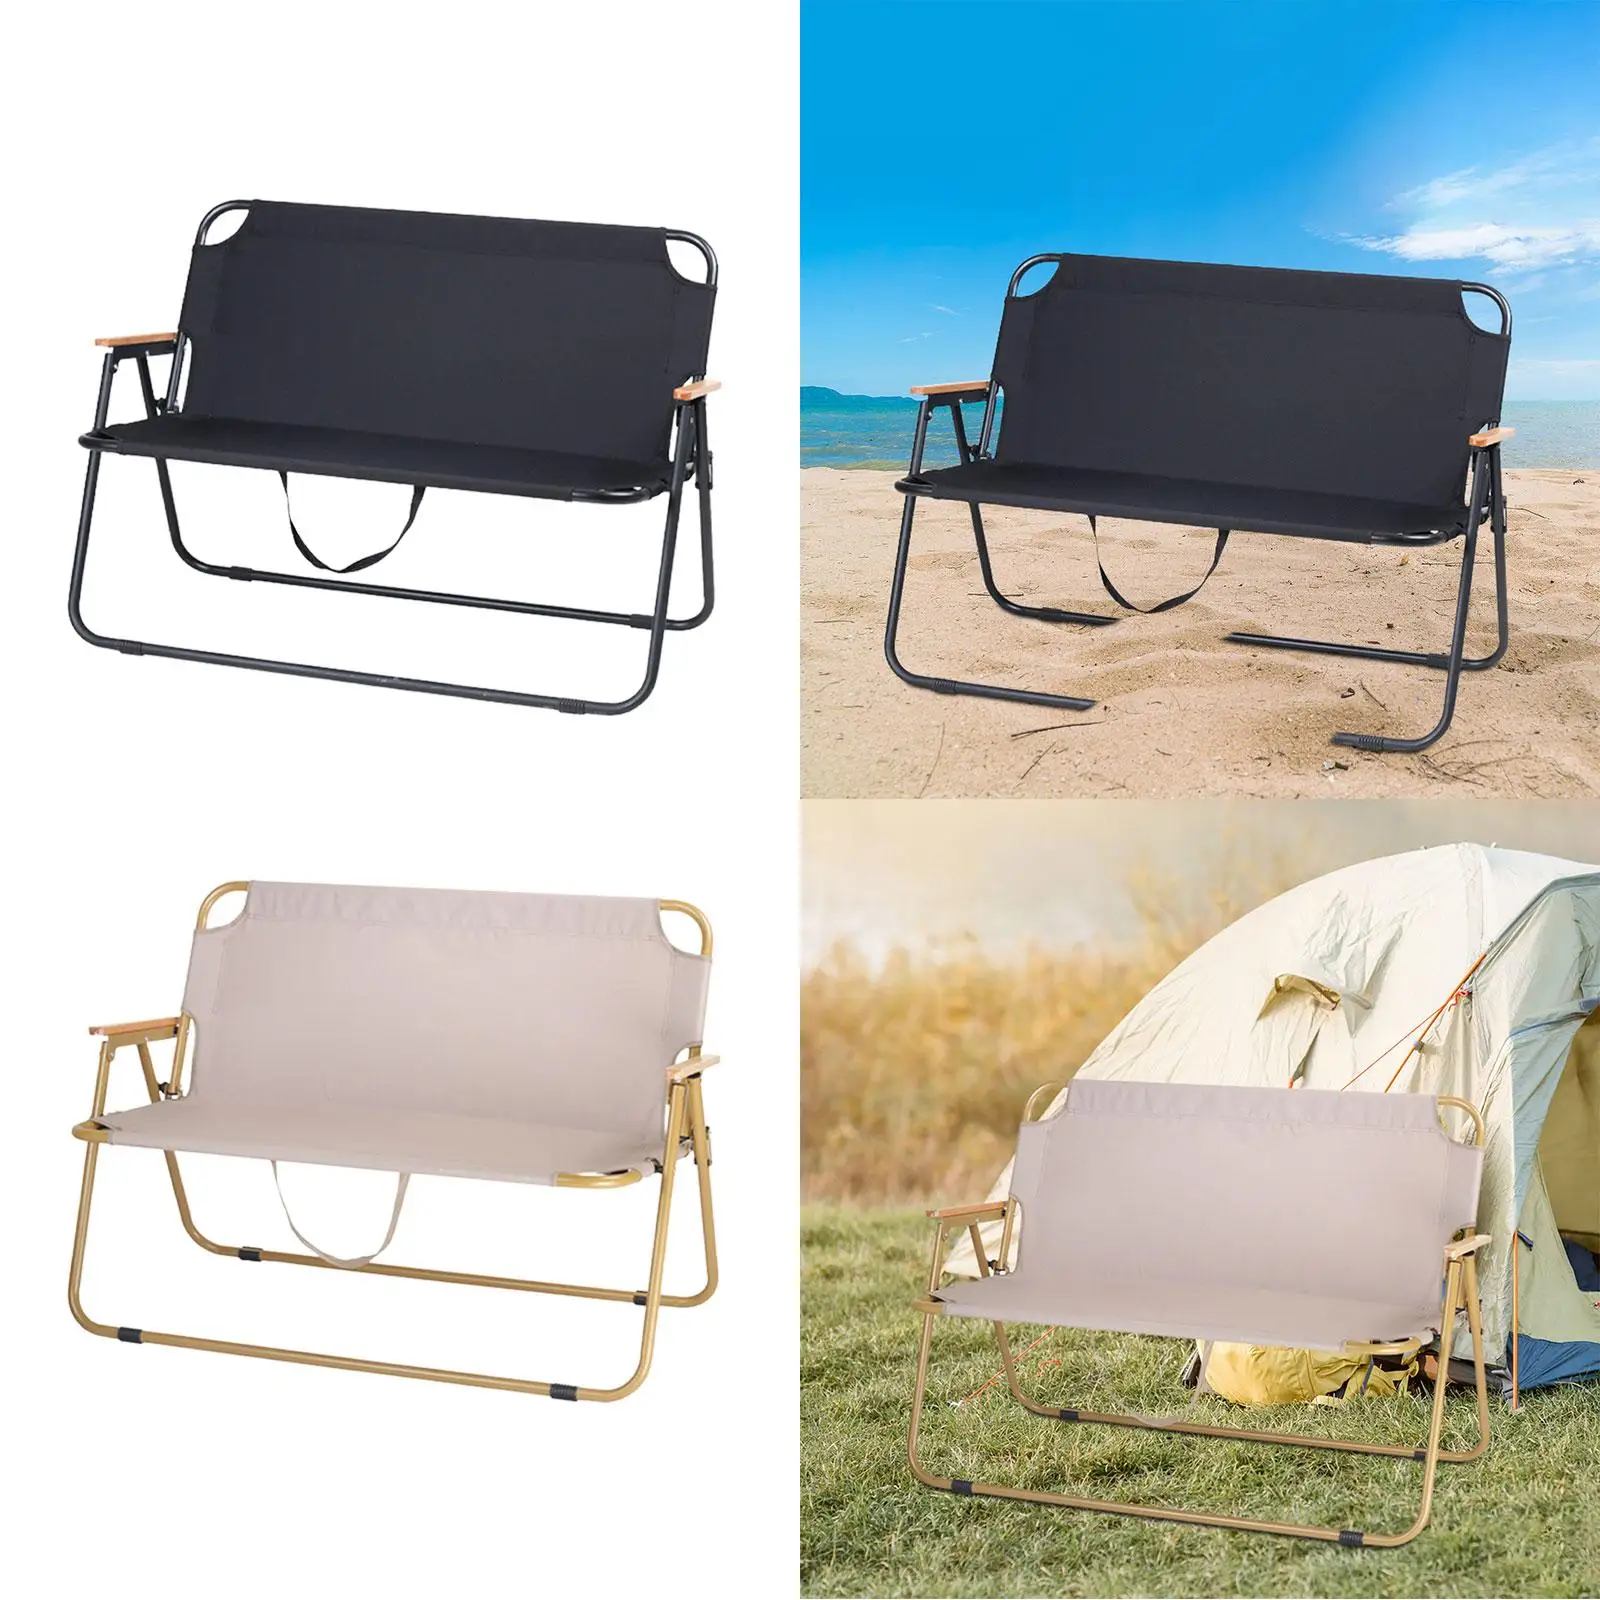 Folding Camping Chair Backpacking Camping Stool Chair Picnic Outdoor Patio Travel Lightweight Fishing Camp Chair Beach Chair